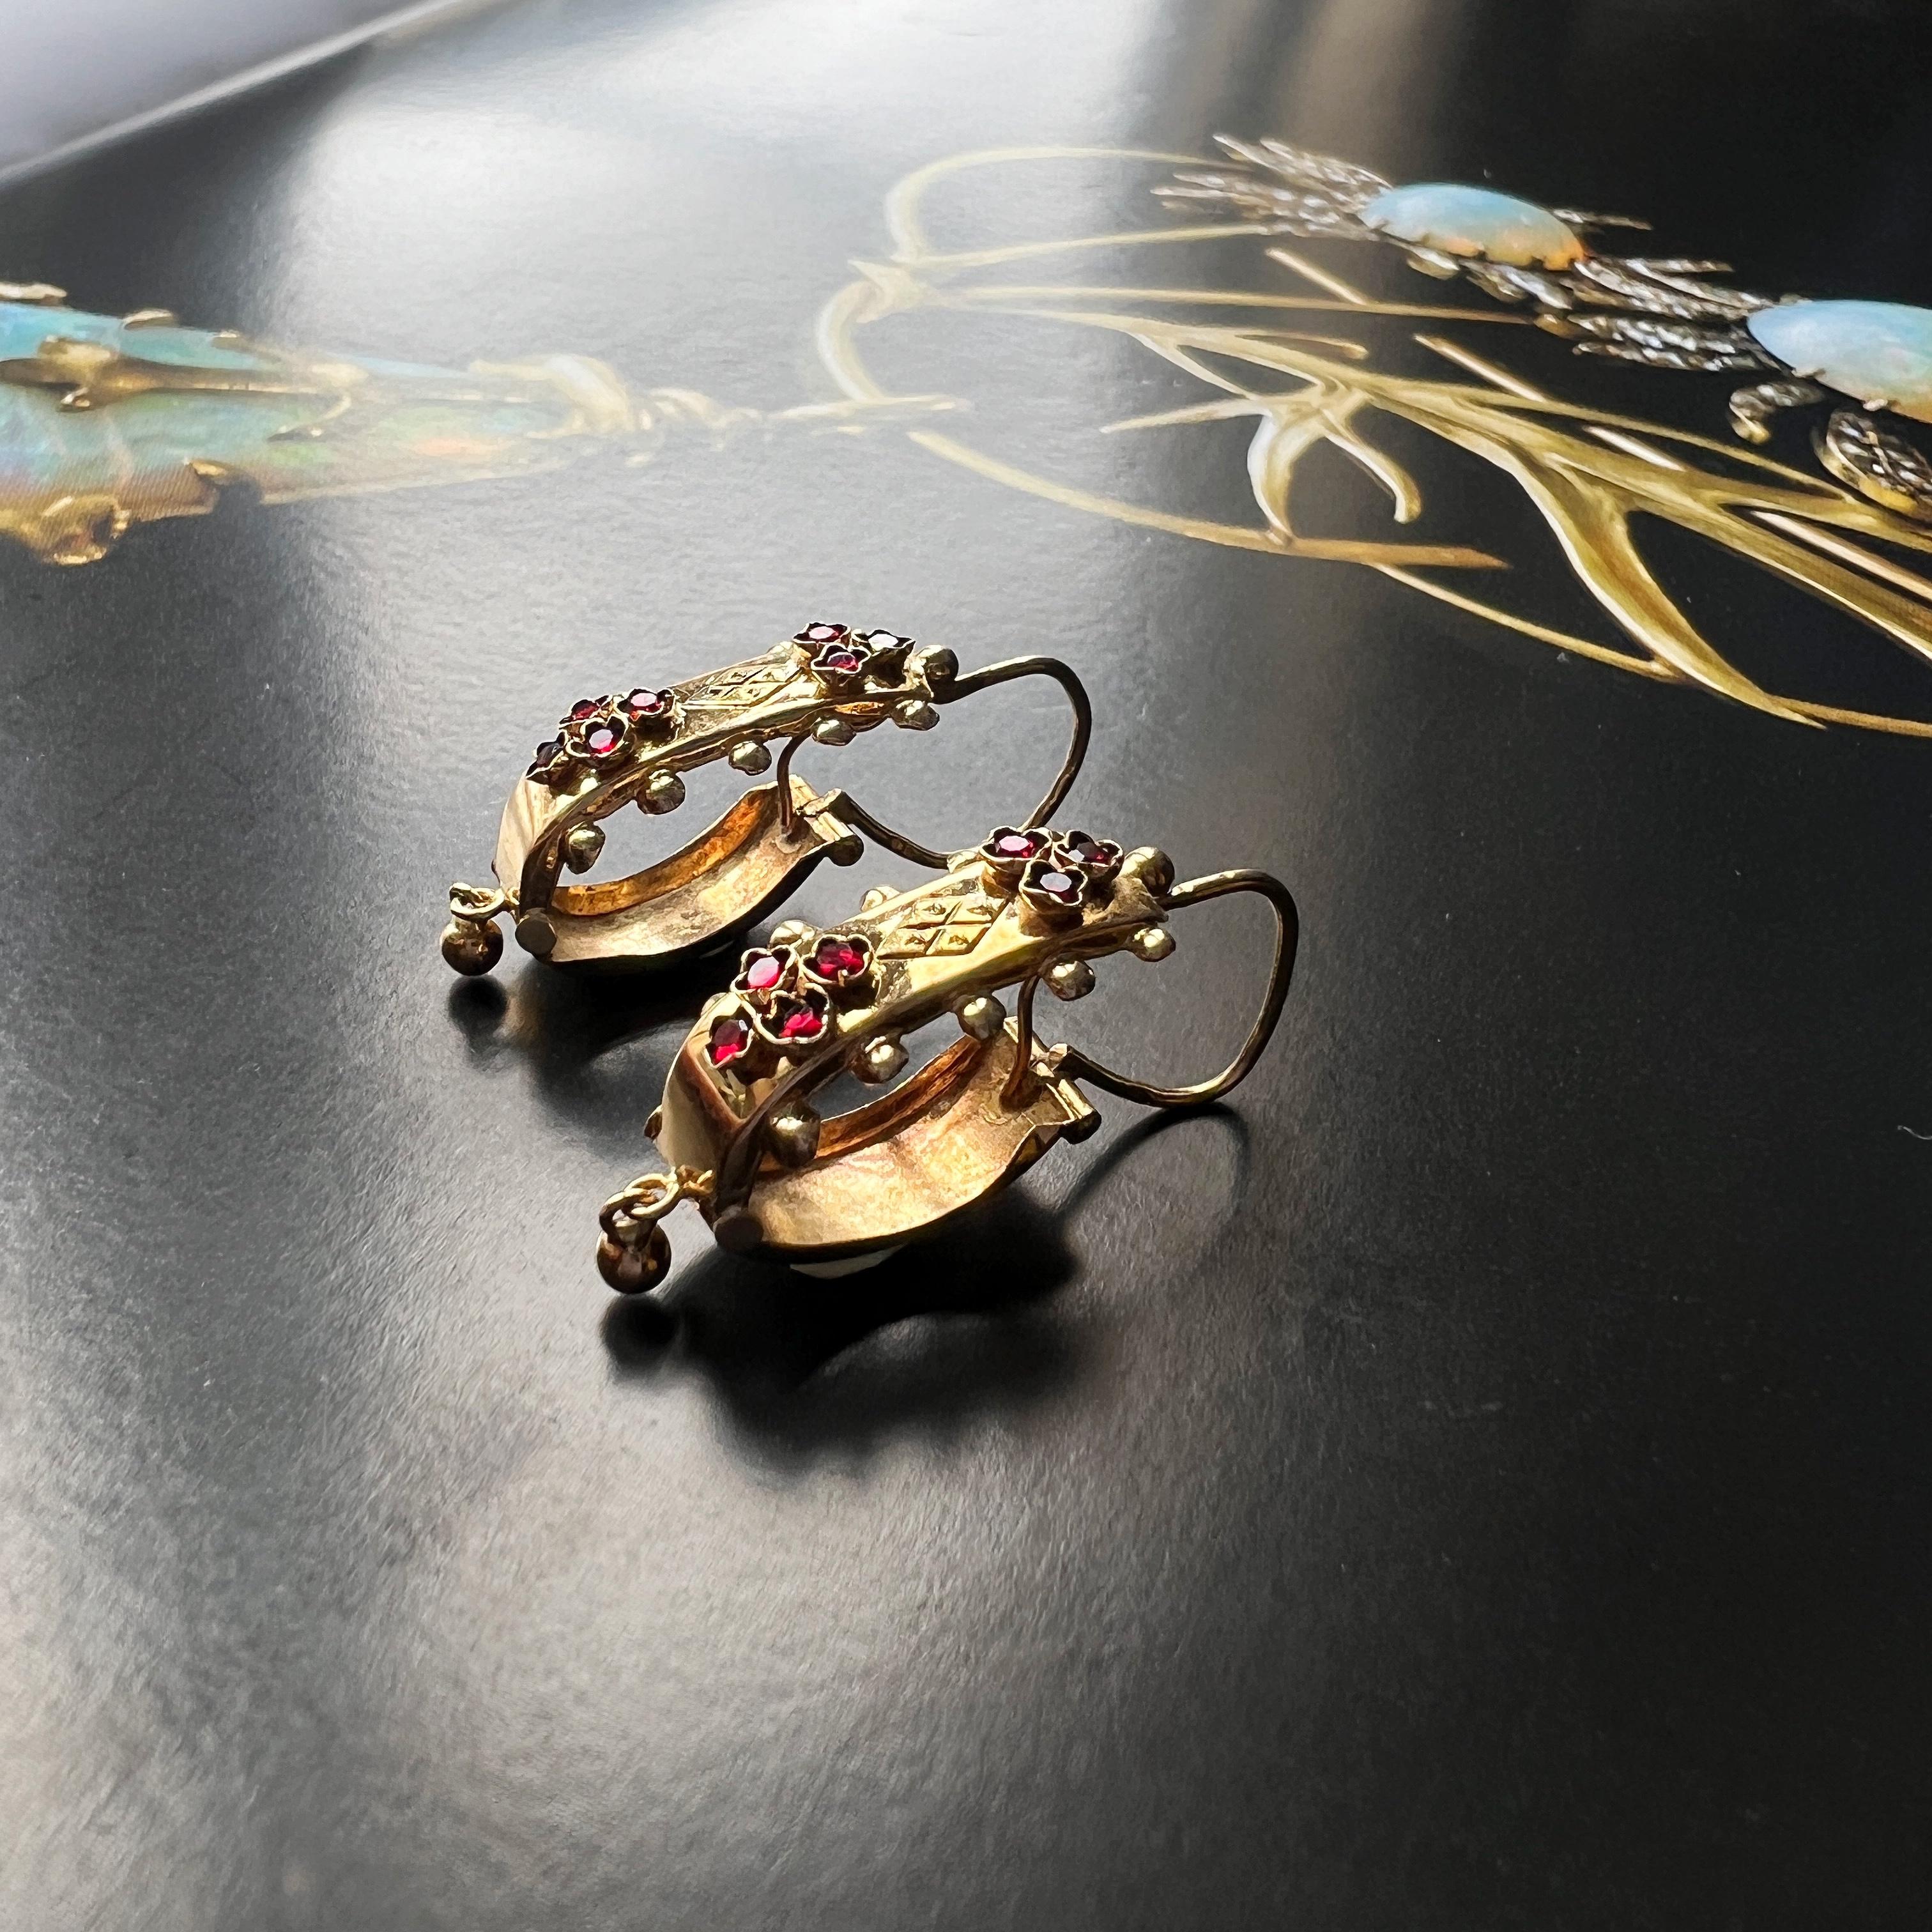 For sale a beautiful pair of French made Poissarde (French for fishwife) earrings made in 18K gold. They are hoop earrings with a back-to-front fitting that resembled a fish-hook.

This particular type is also called “Briquets” (French for Fire